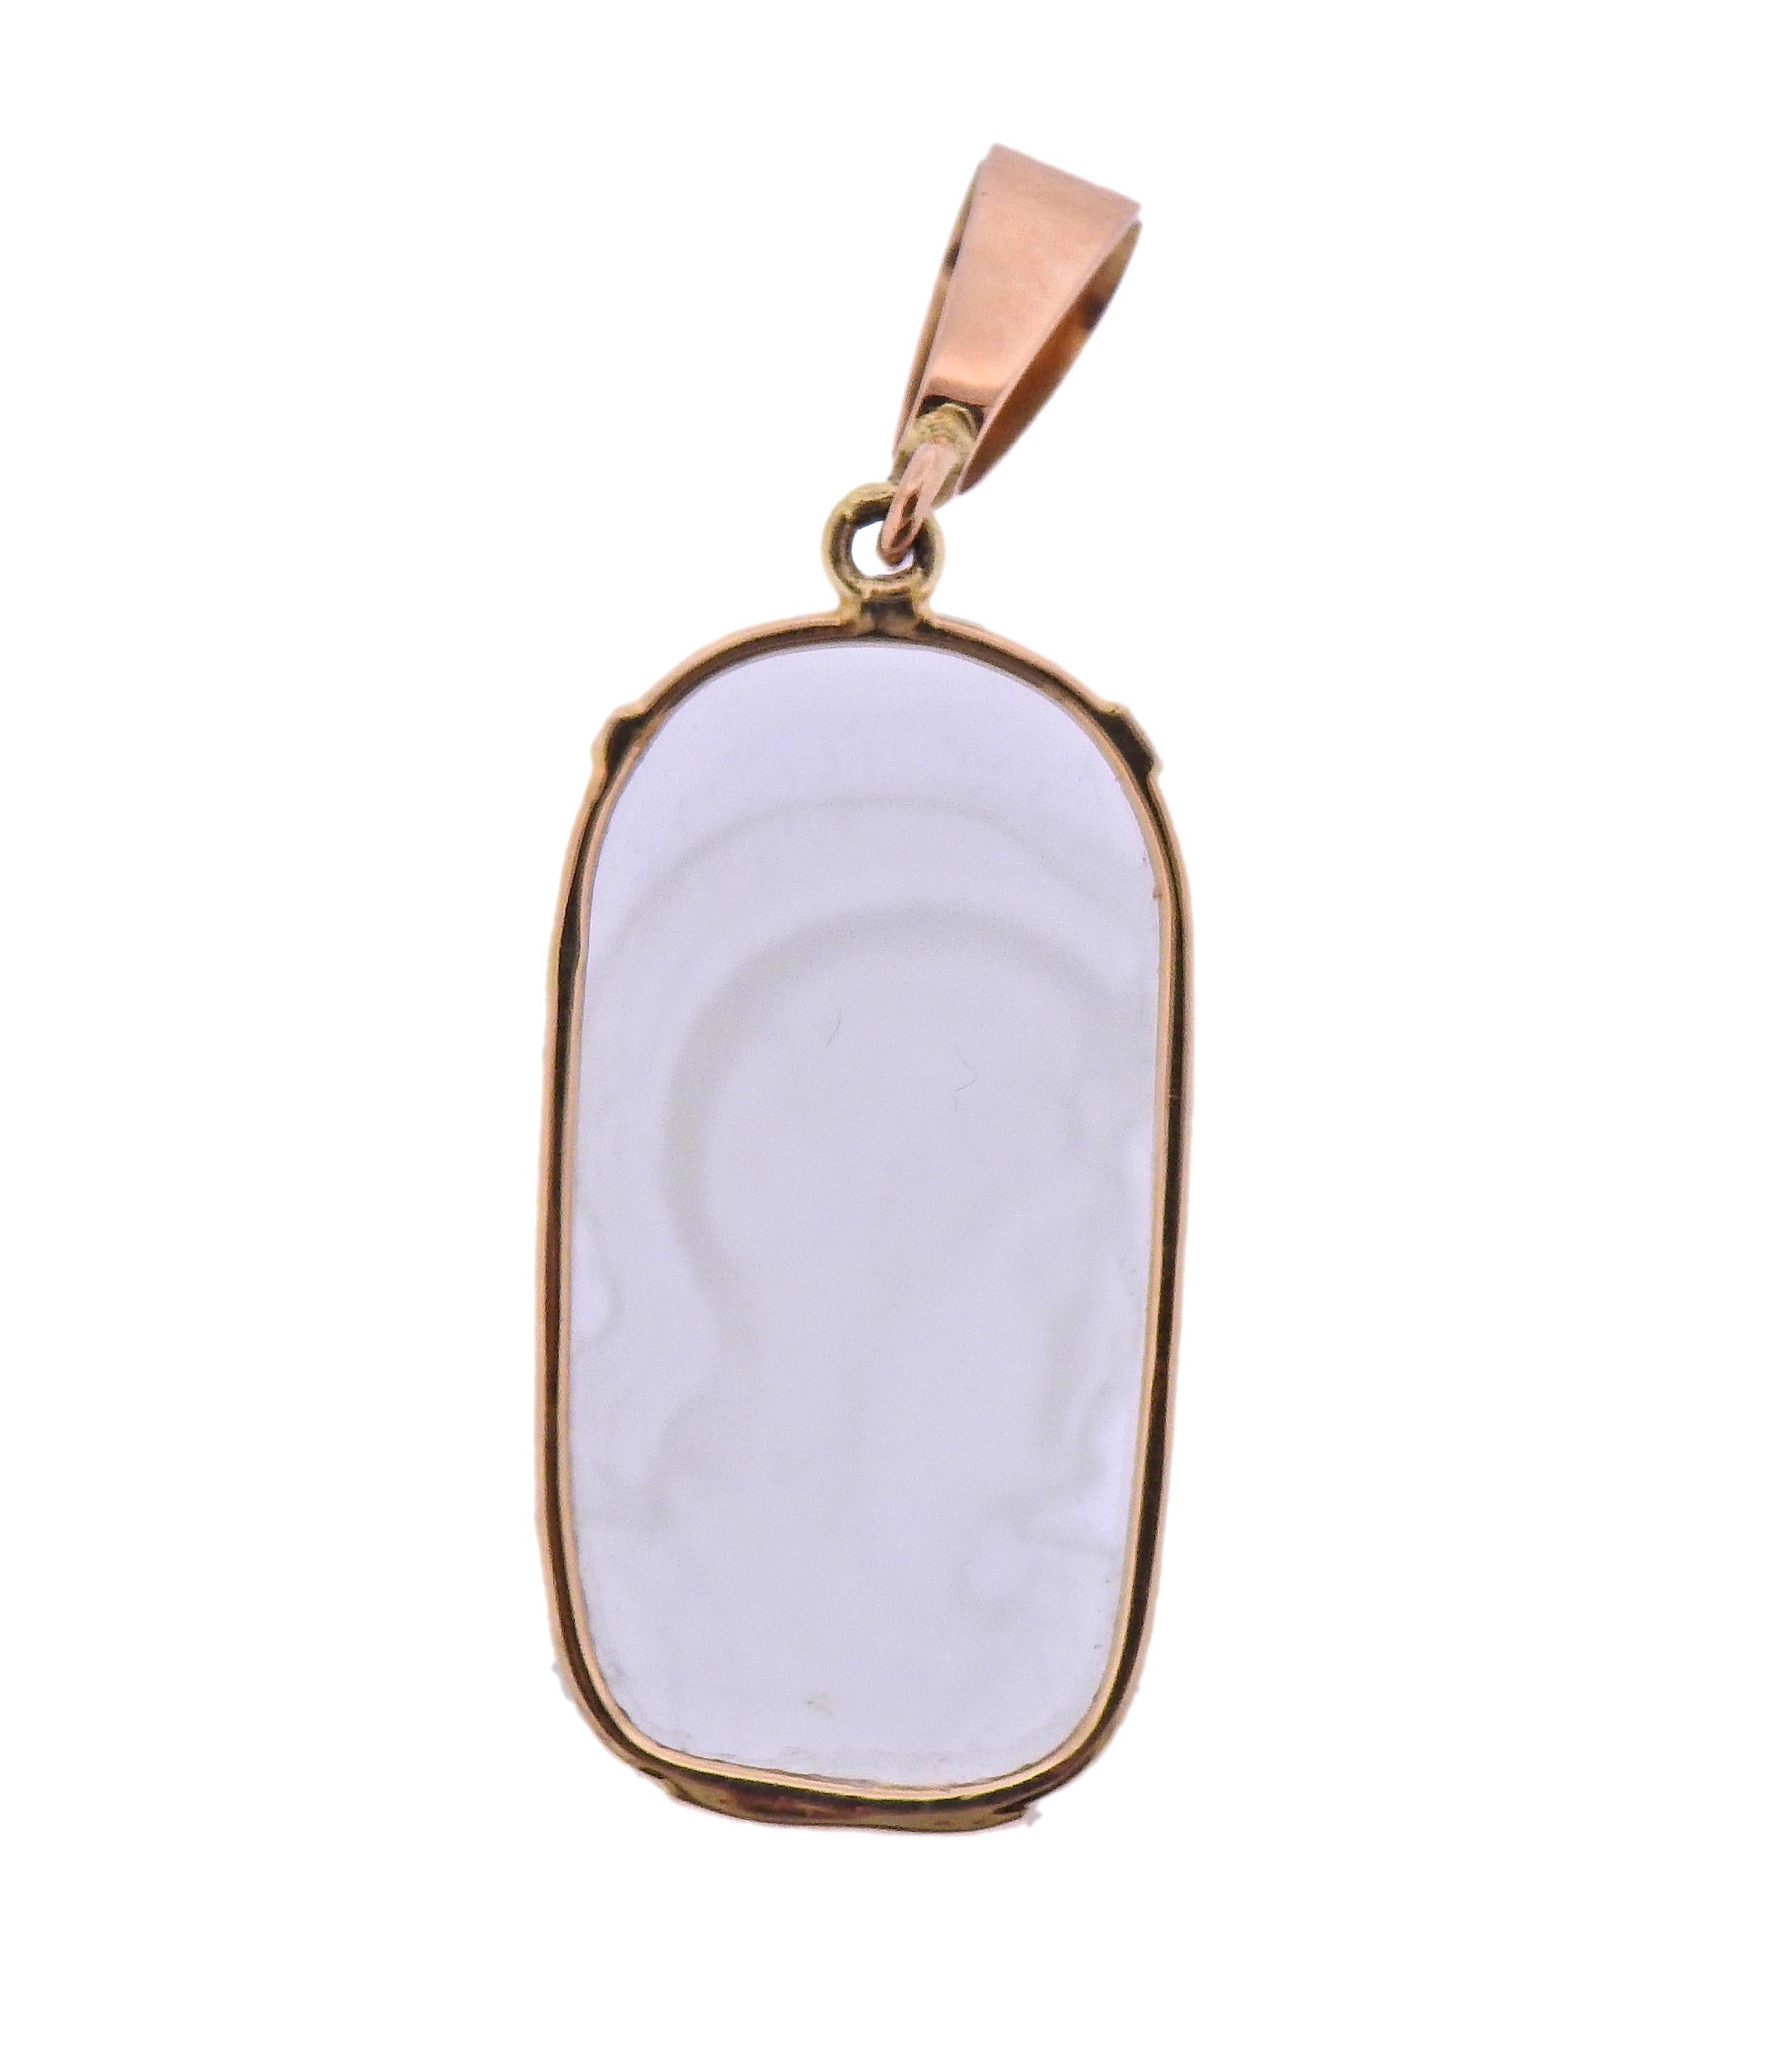 14k gold pendant, featuring carved crystal cameo, depicting a Roman soldier profile. Pendant measures 2